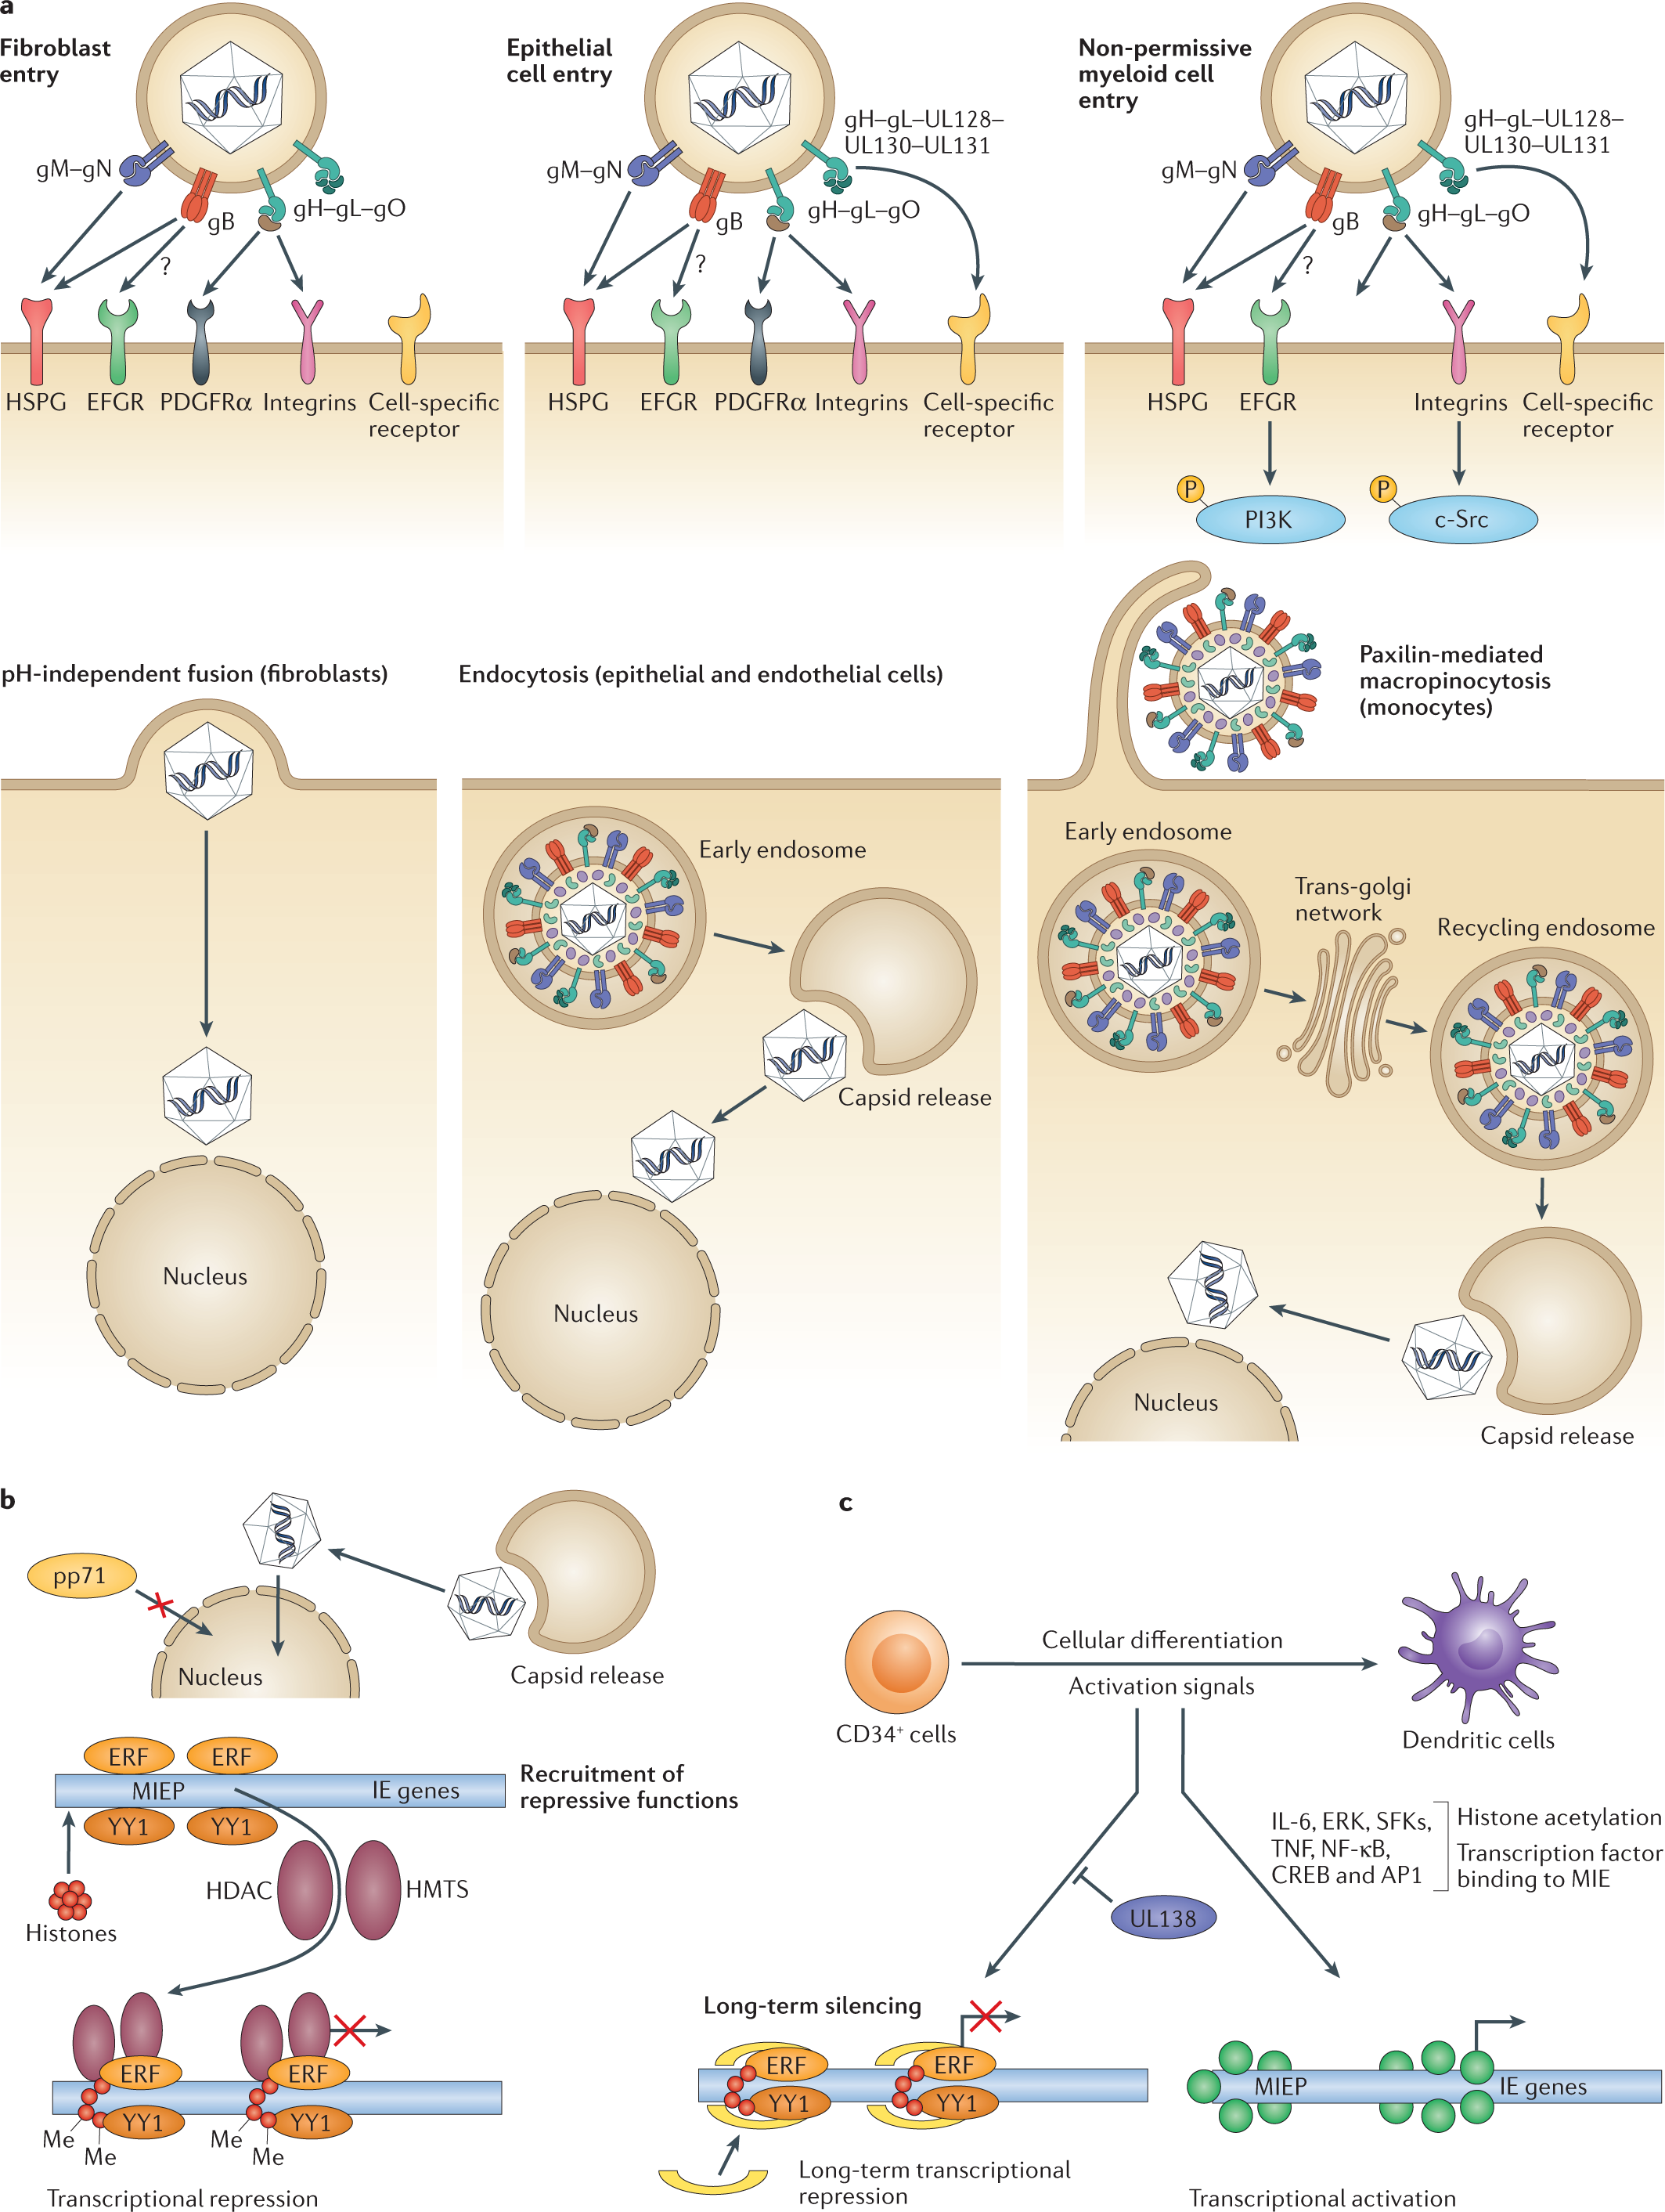 Pathogenesis of human cytomegalovirus in the immunocompromised host |  Nature Reviews Microbiology